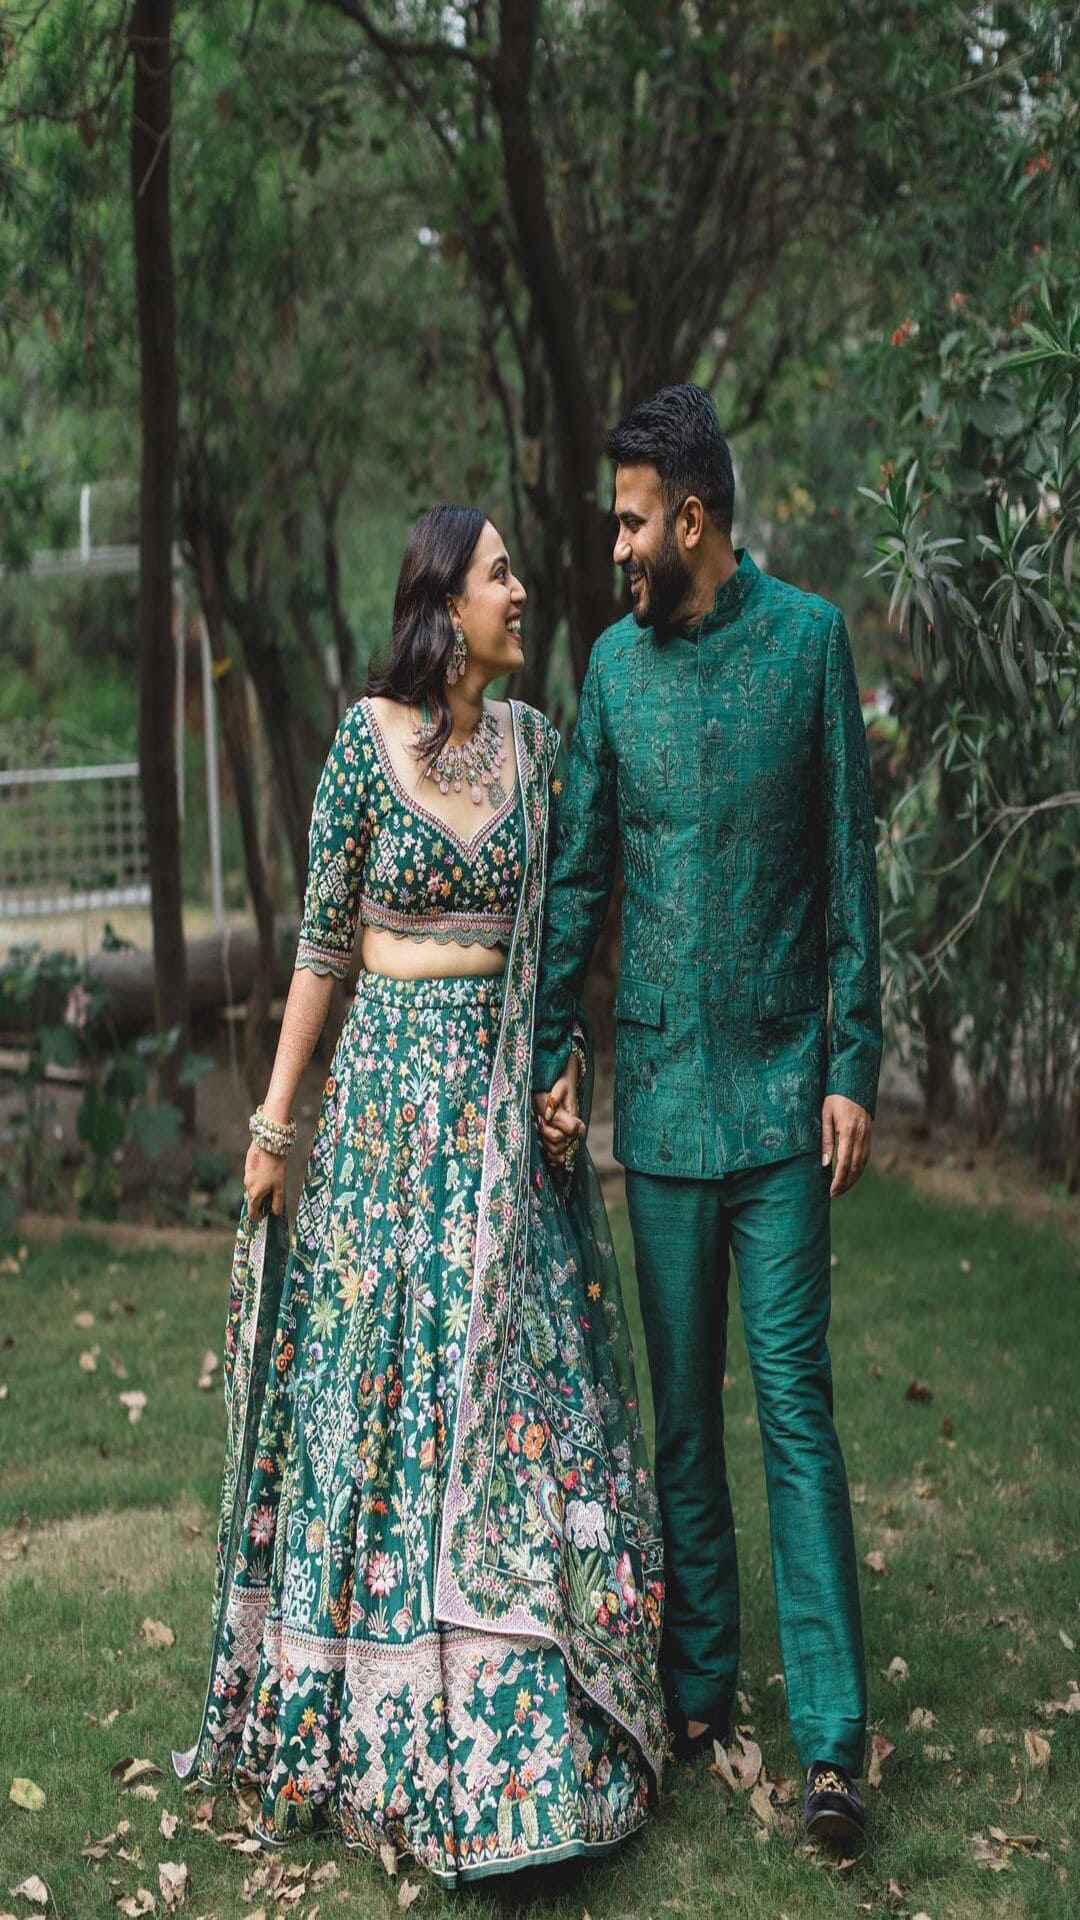 Photo of matching bride and groom in green outfits for their mehendi